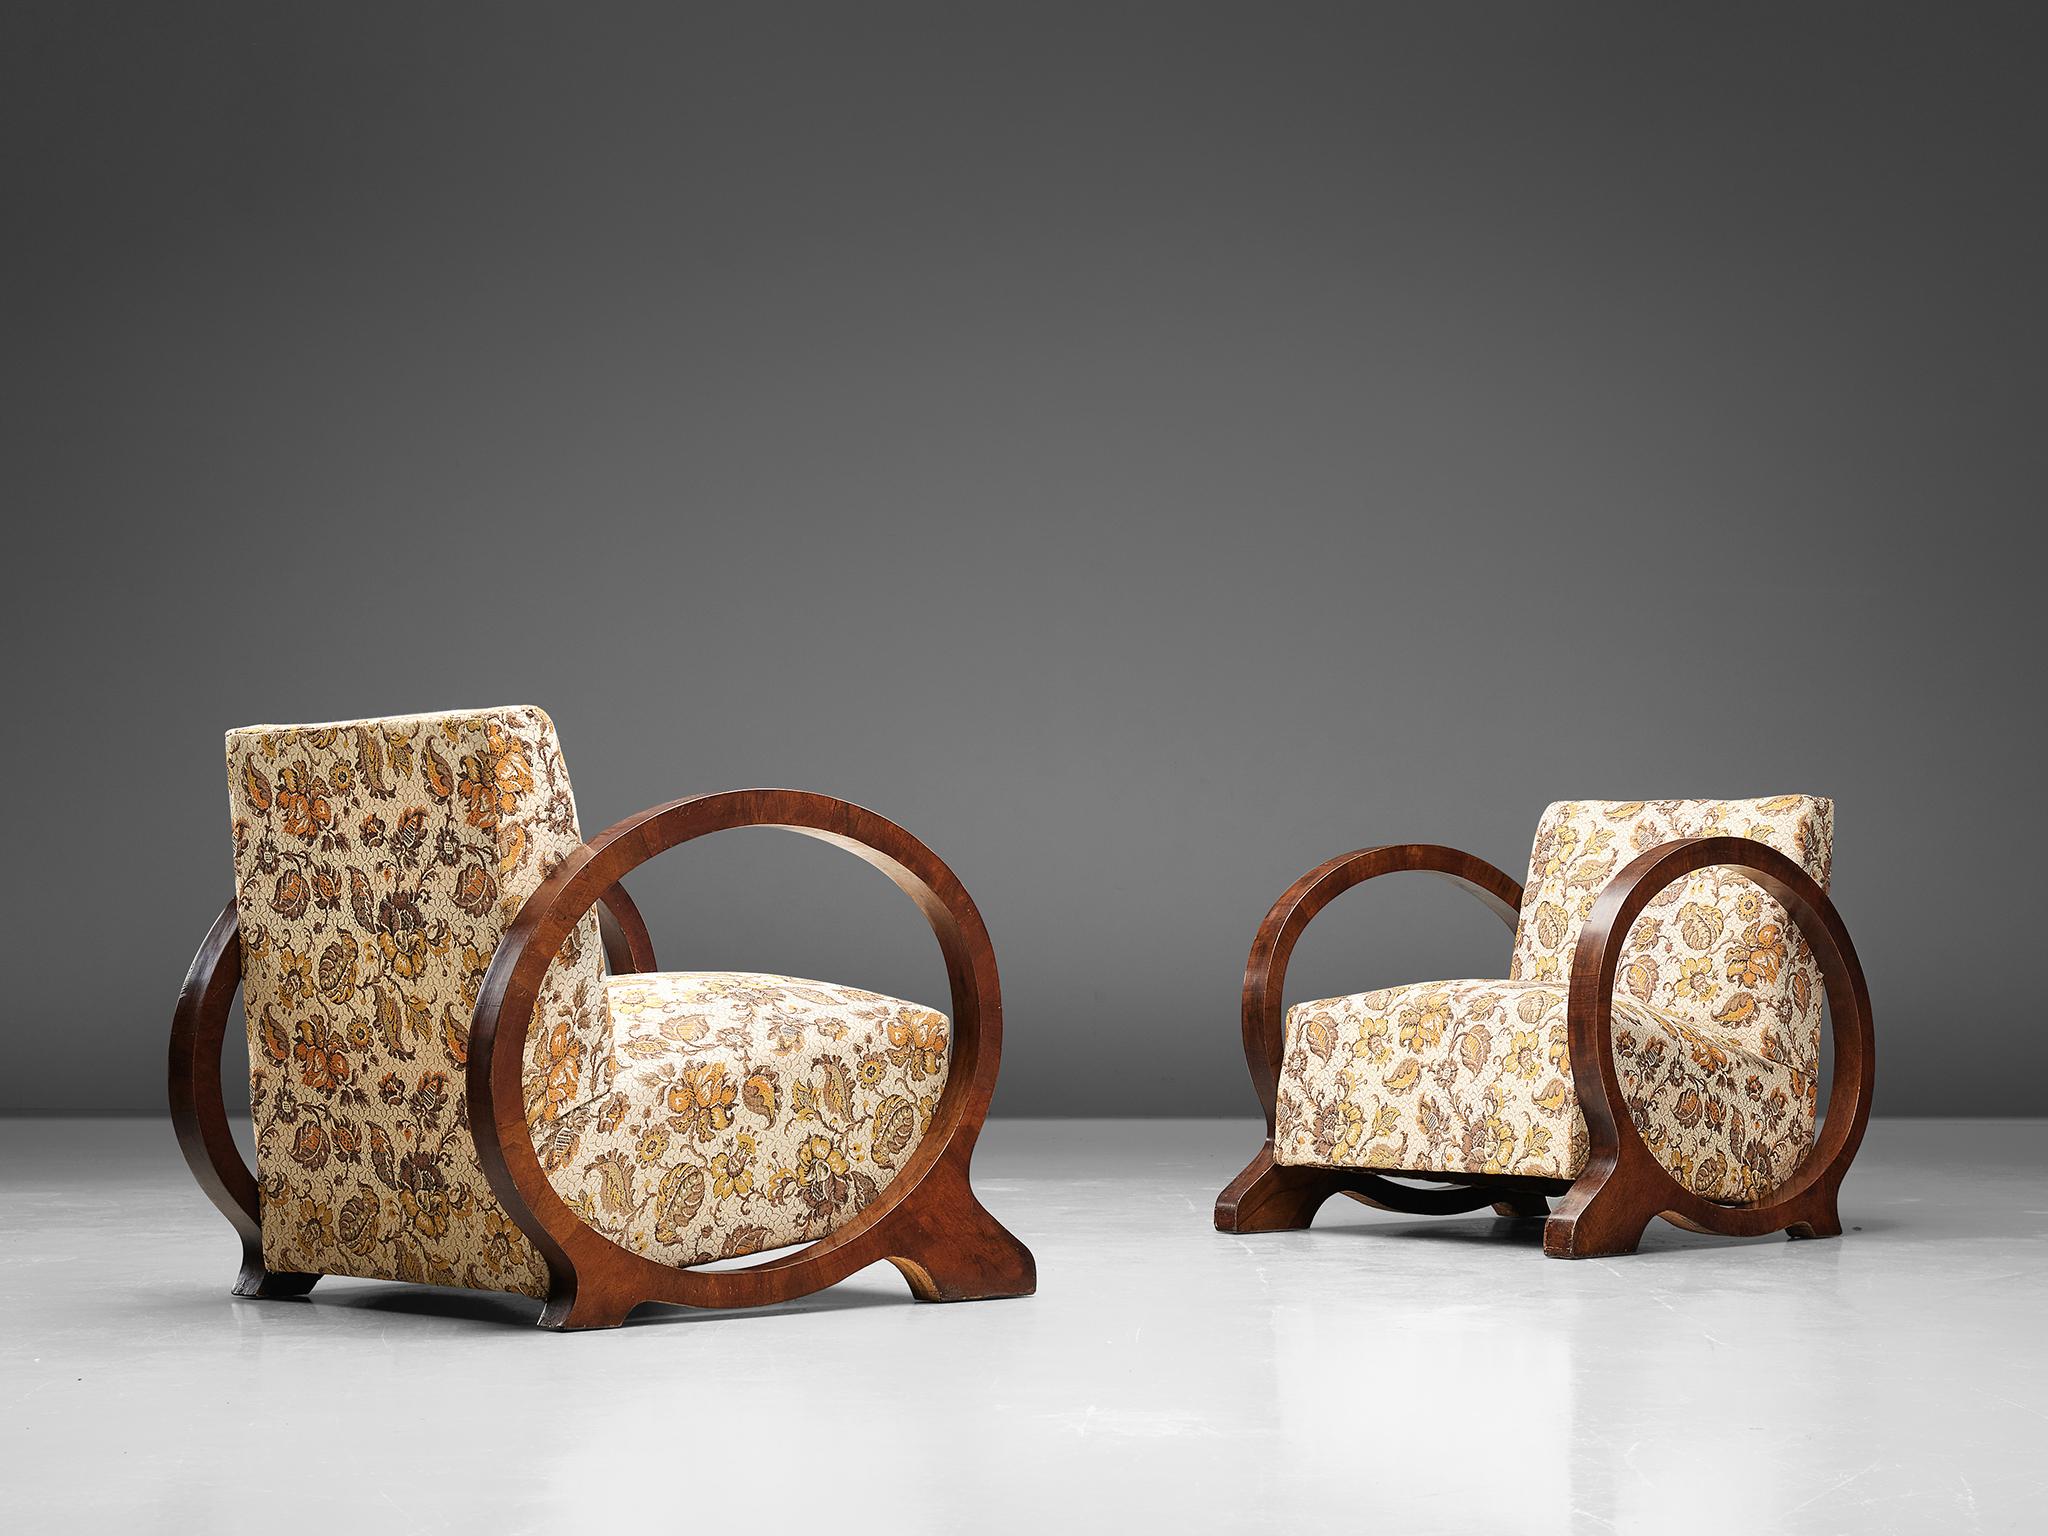 Set of armchairs, walnut and fabric, Sweden 1930s. 

Pair of extraordinarily designed Swedish armchairs. The armrests the legs and the base of the chair are all created out of one circle. This round form on each side or the chair is executed in